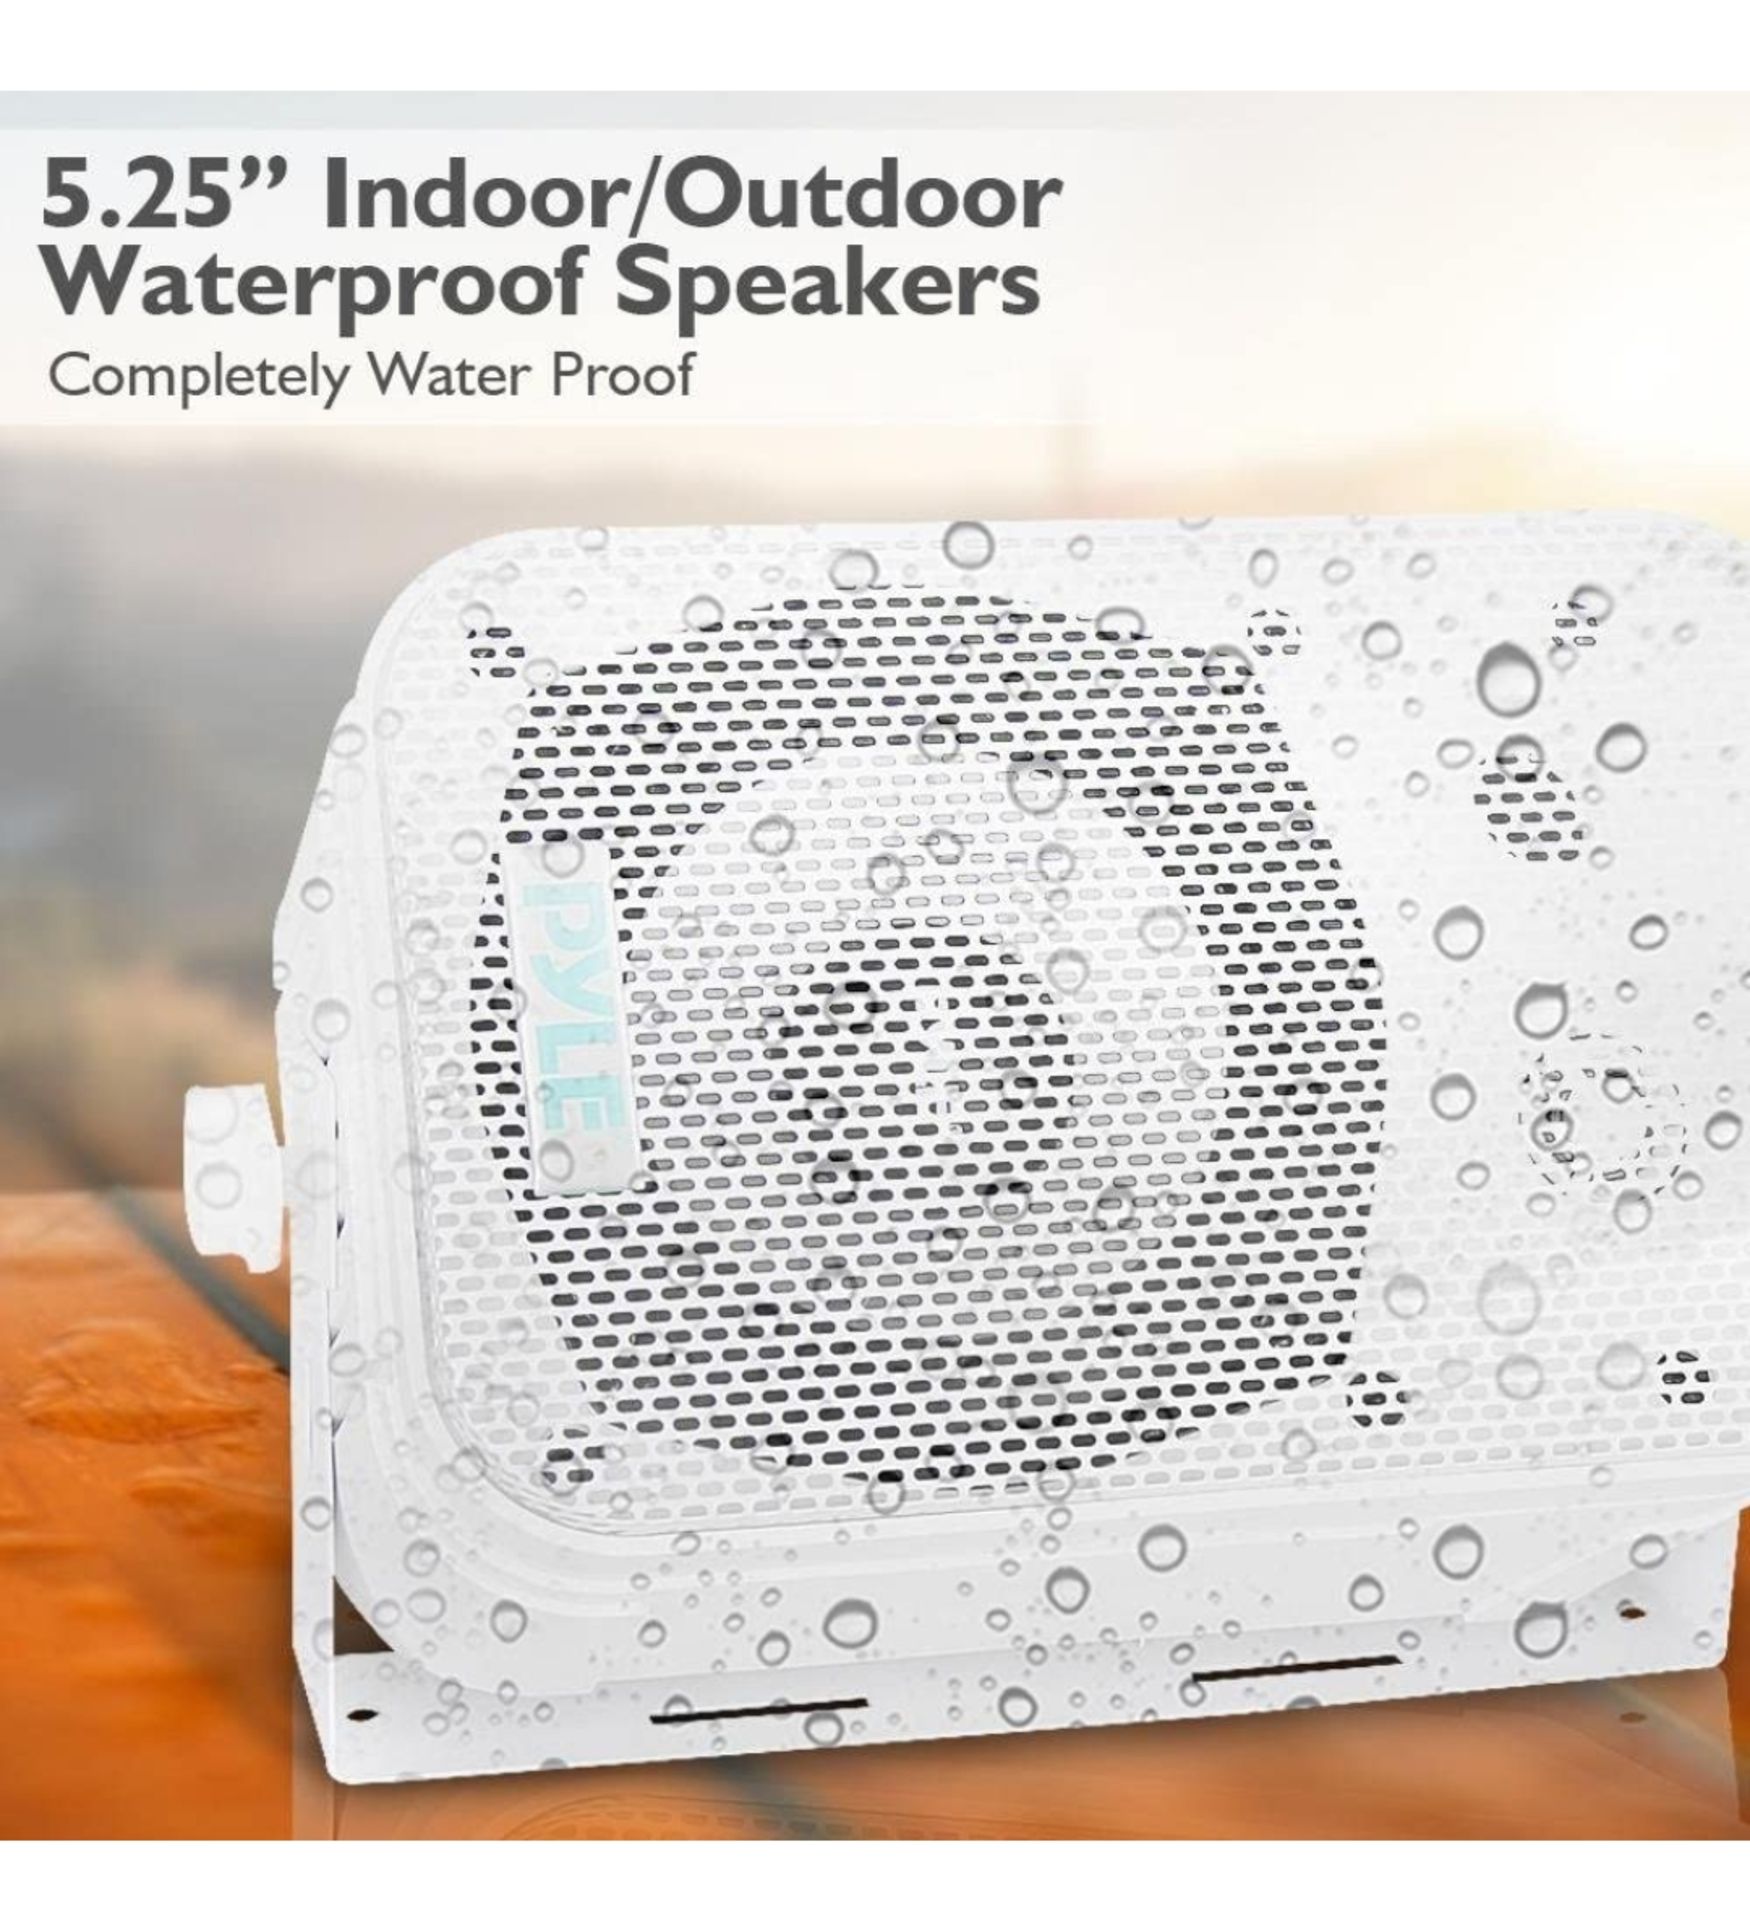 50 X PAIRS OF 2 X PYLE PDWR40W DUAL WATERPROOF OUTDOOR SPEAKER SYSTEM - RRP £1800 - Image 5 of 8